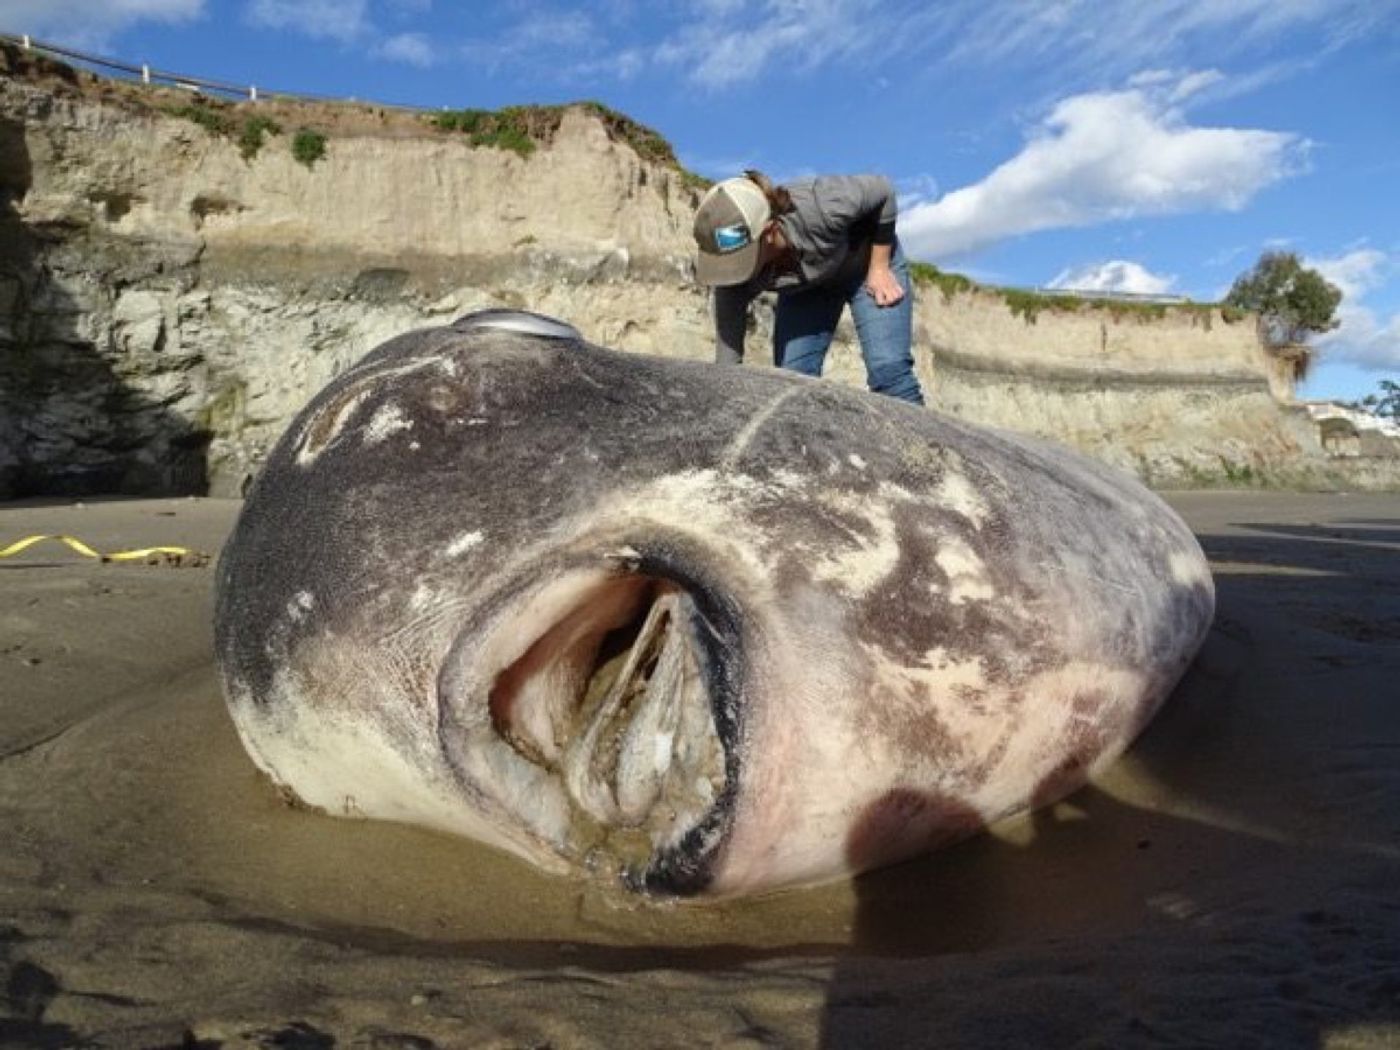 This is the hoodwinker sunfish that washed up in California last week.